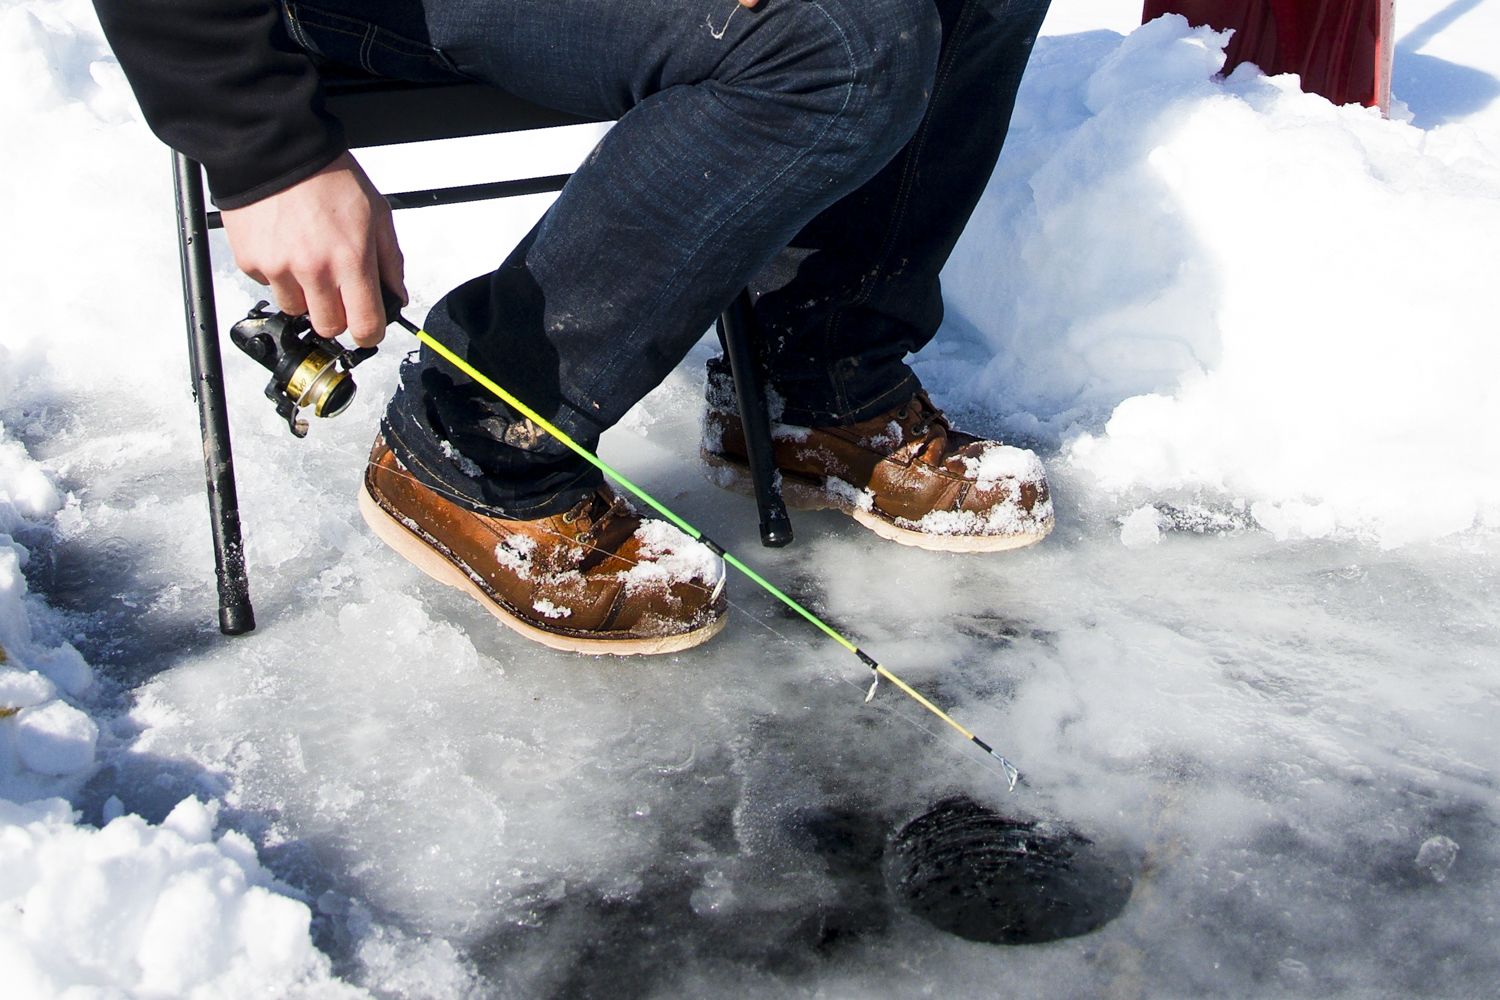 What to know when ice fishing this winter